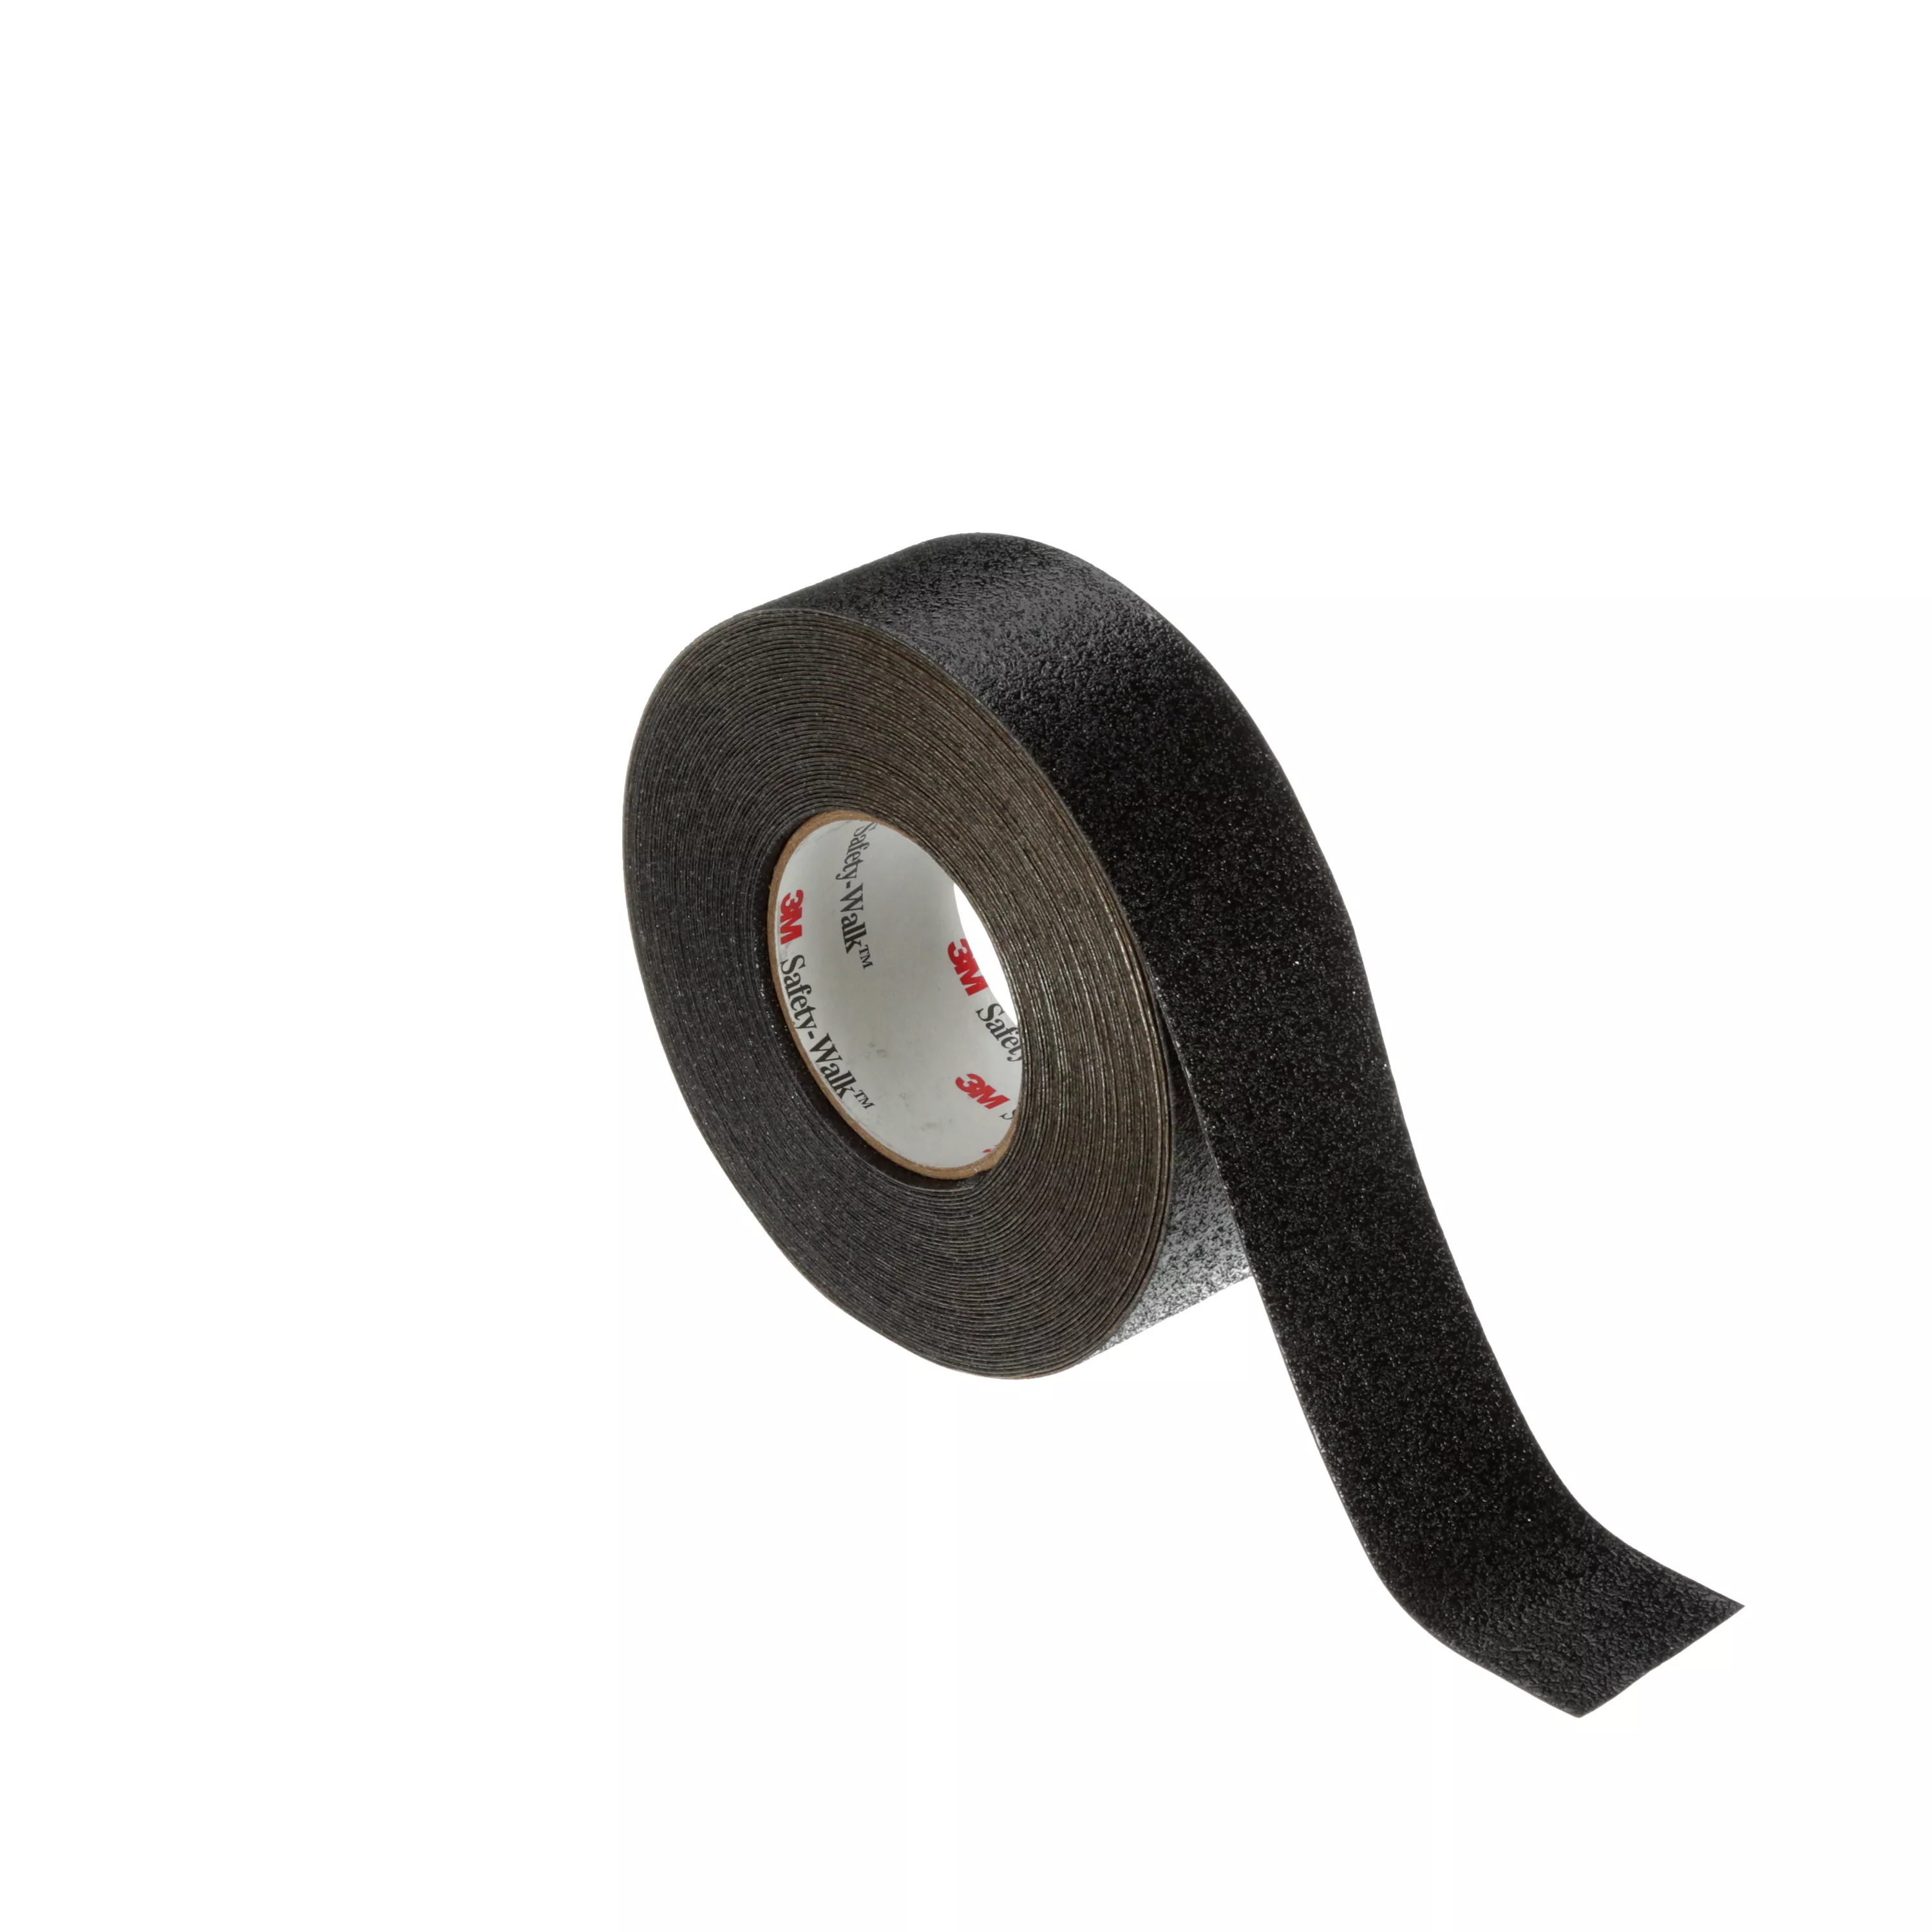 SKU 7000010831 | 3M™ Safety-Walk™ Slip-Resistant Conformable Tapes & Treads 510